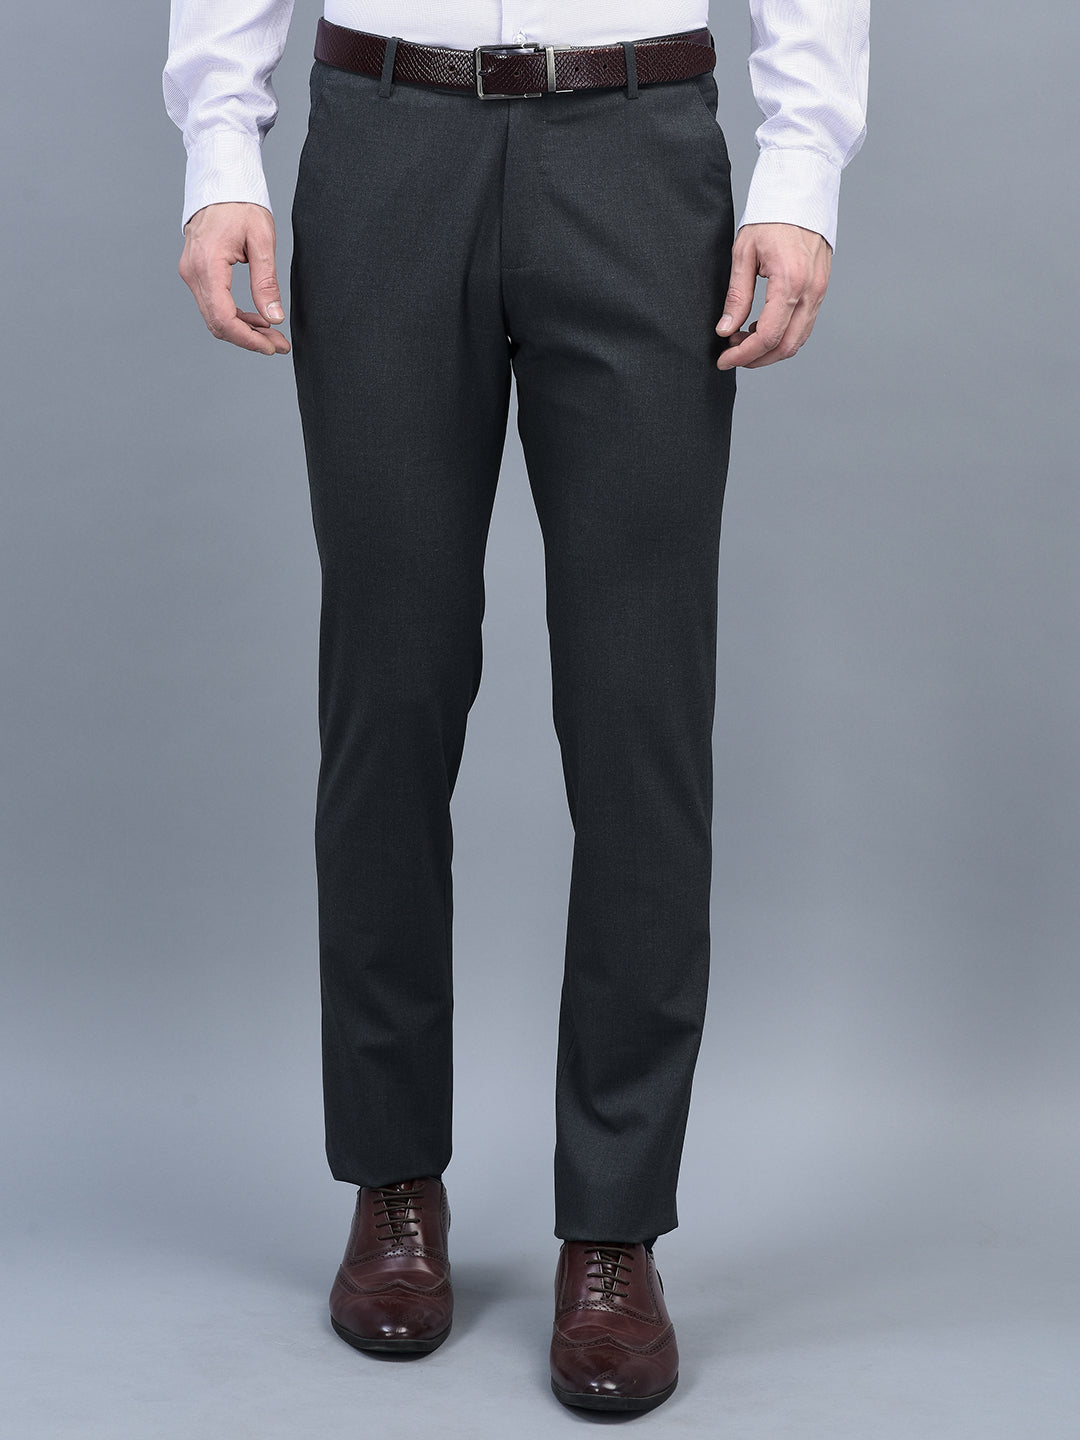 Buy Park Avenue Formal Trousers online - Men - 248 products | FASHIOLA.in